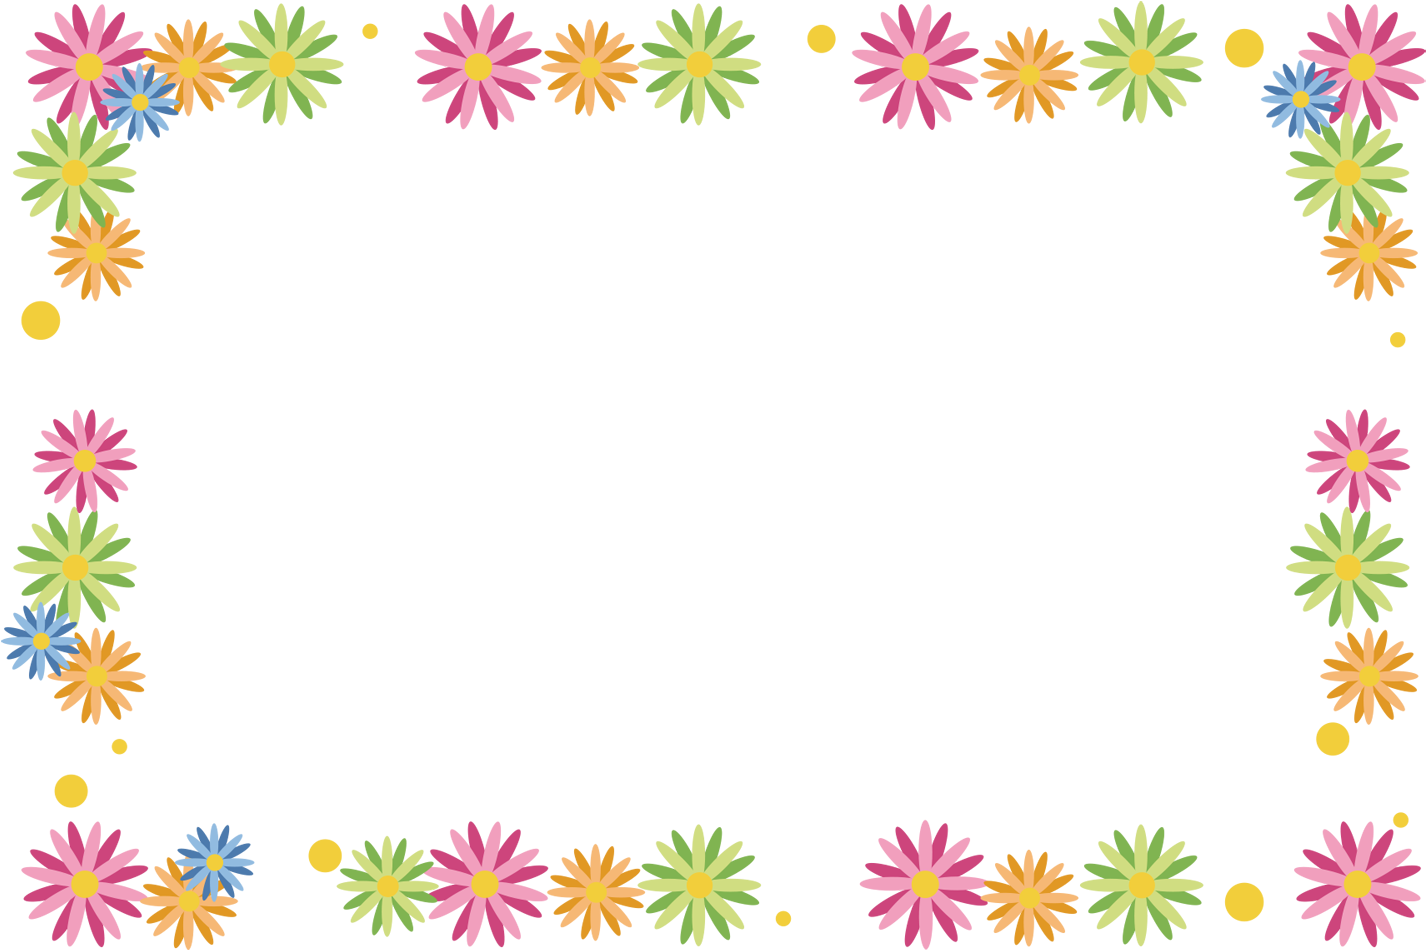 A Black Background With Colorful Flowers